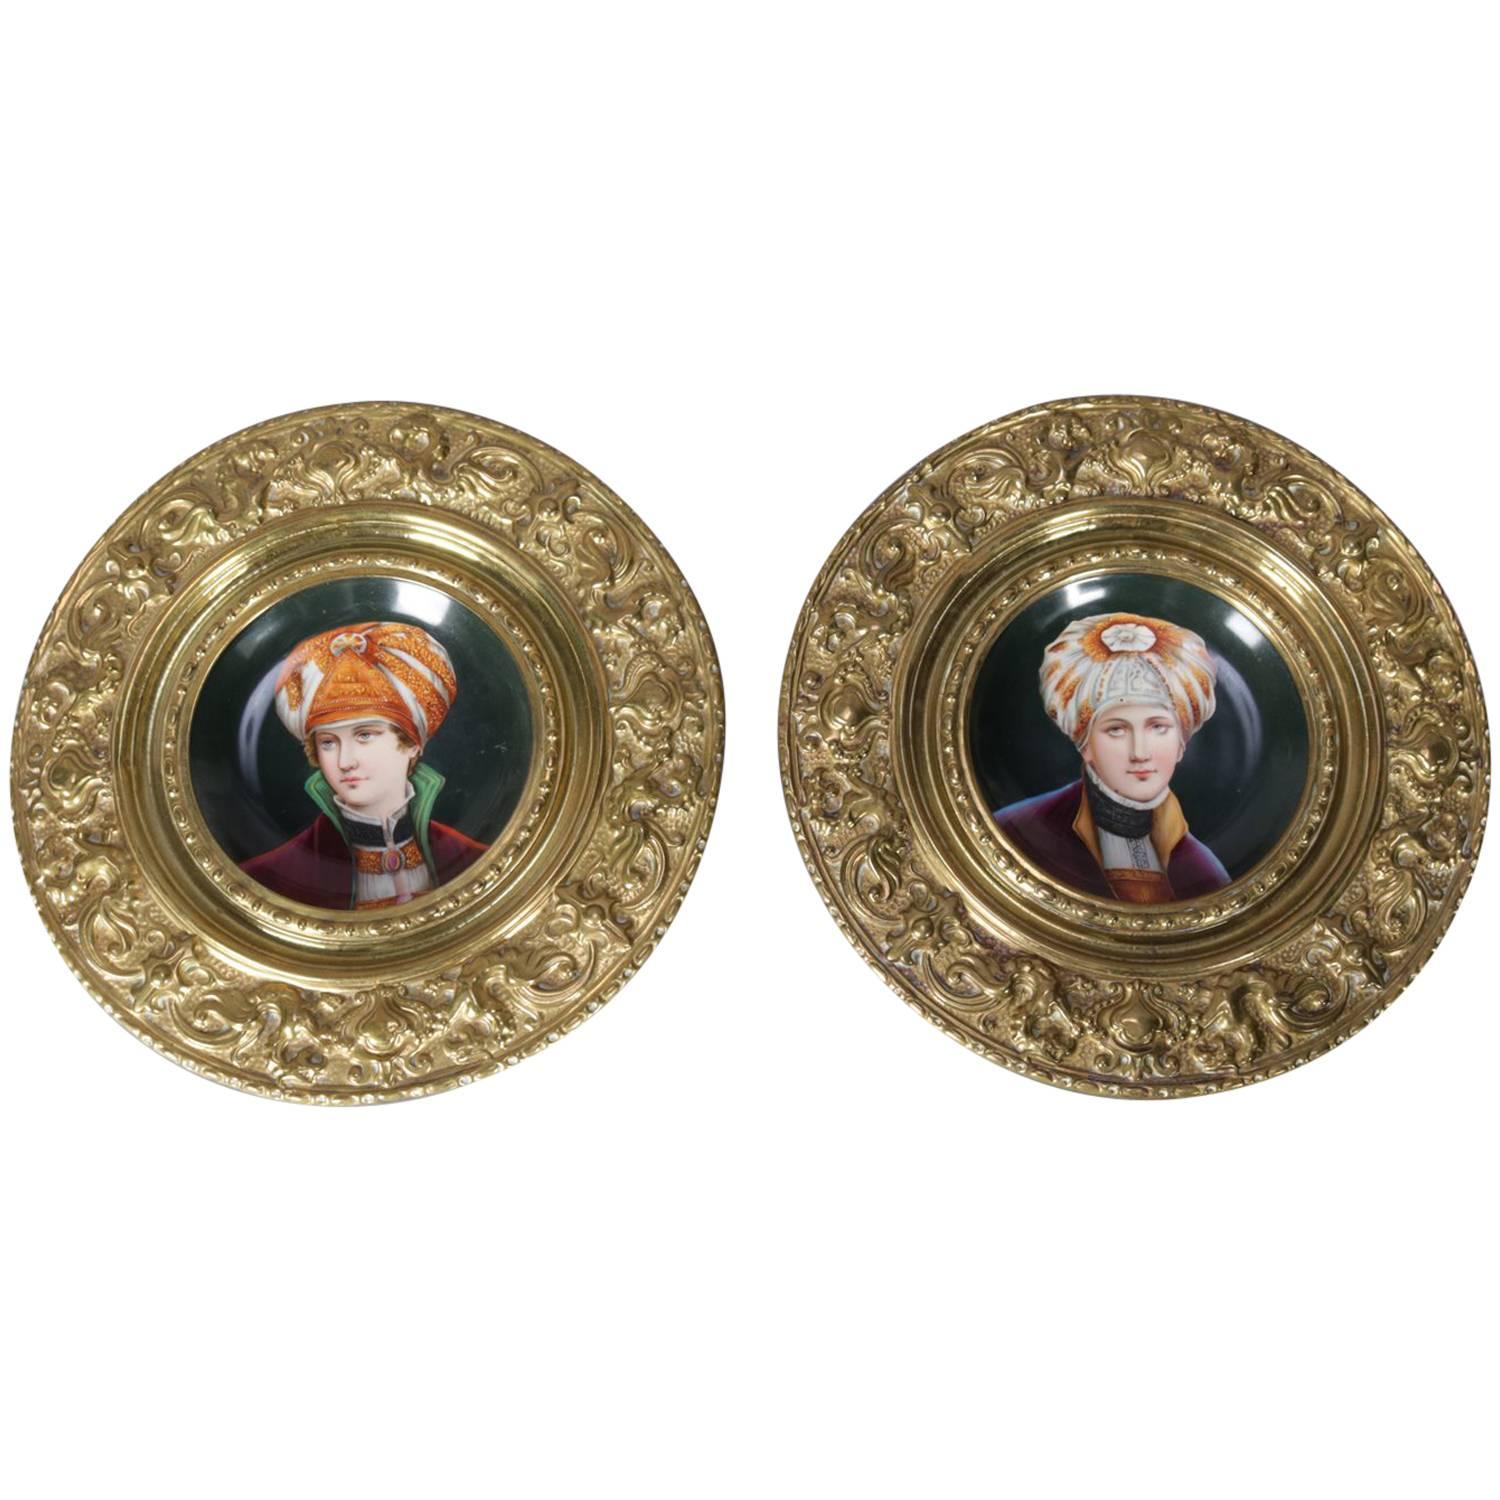 Two Hand-Painted Porcelain Maharaja Portrait Plates, India, Embossed Frame